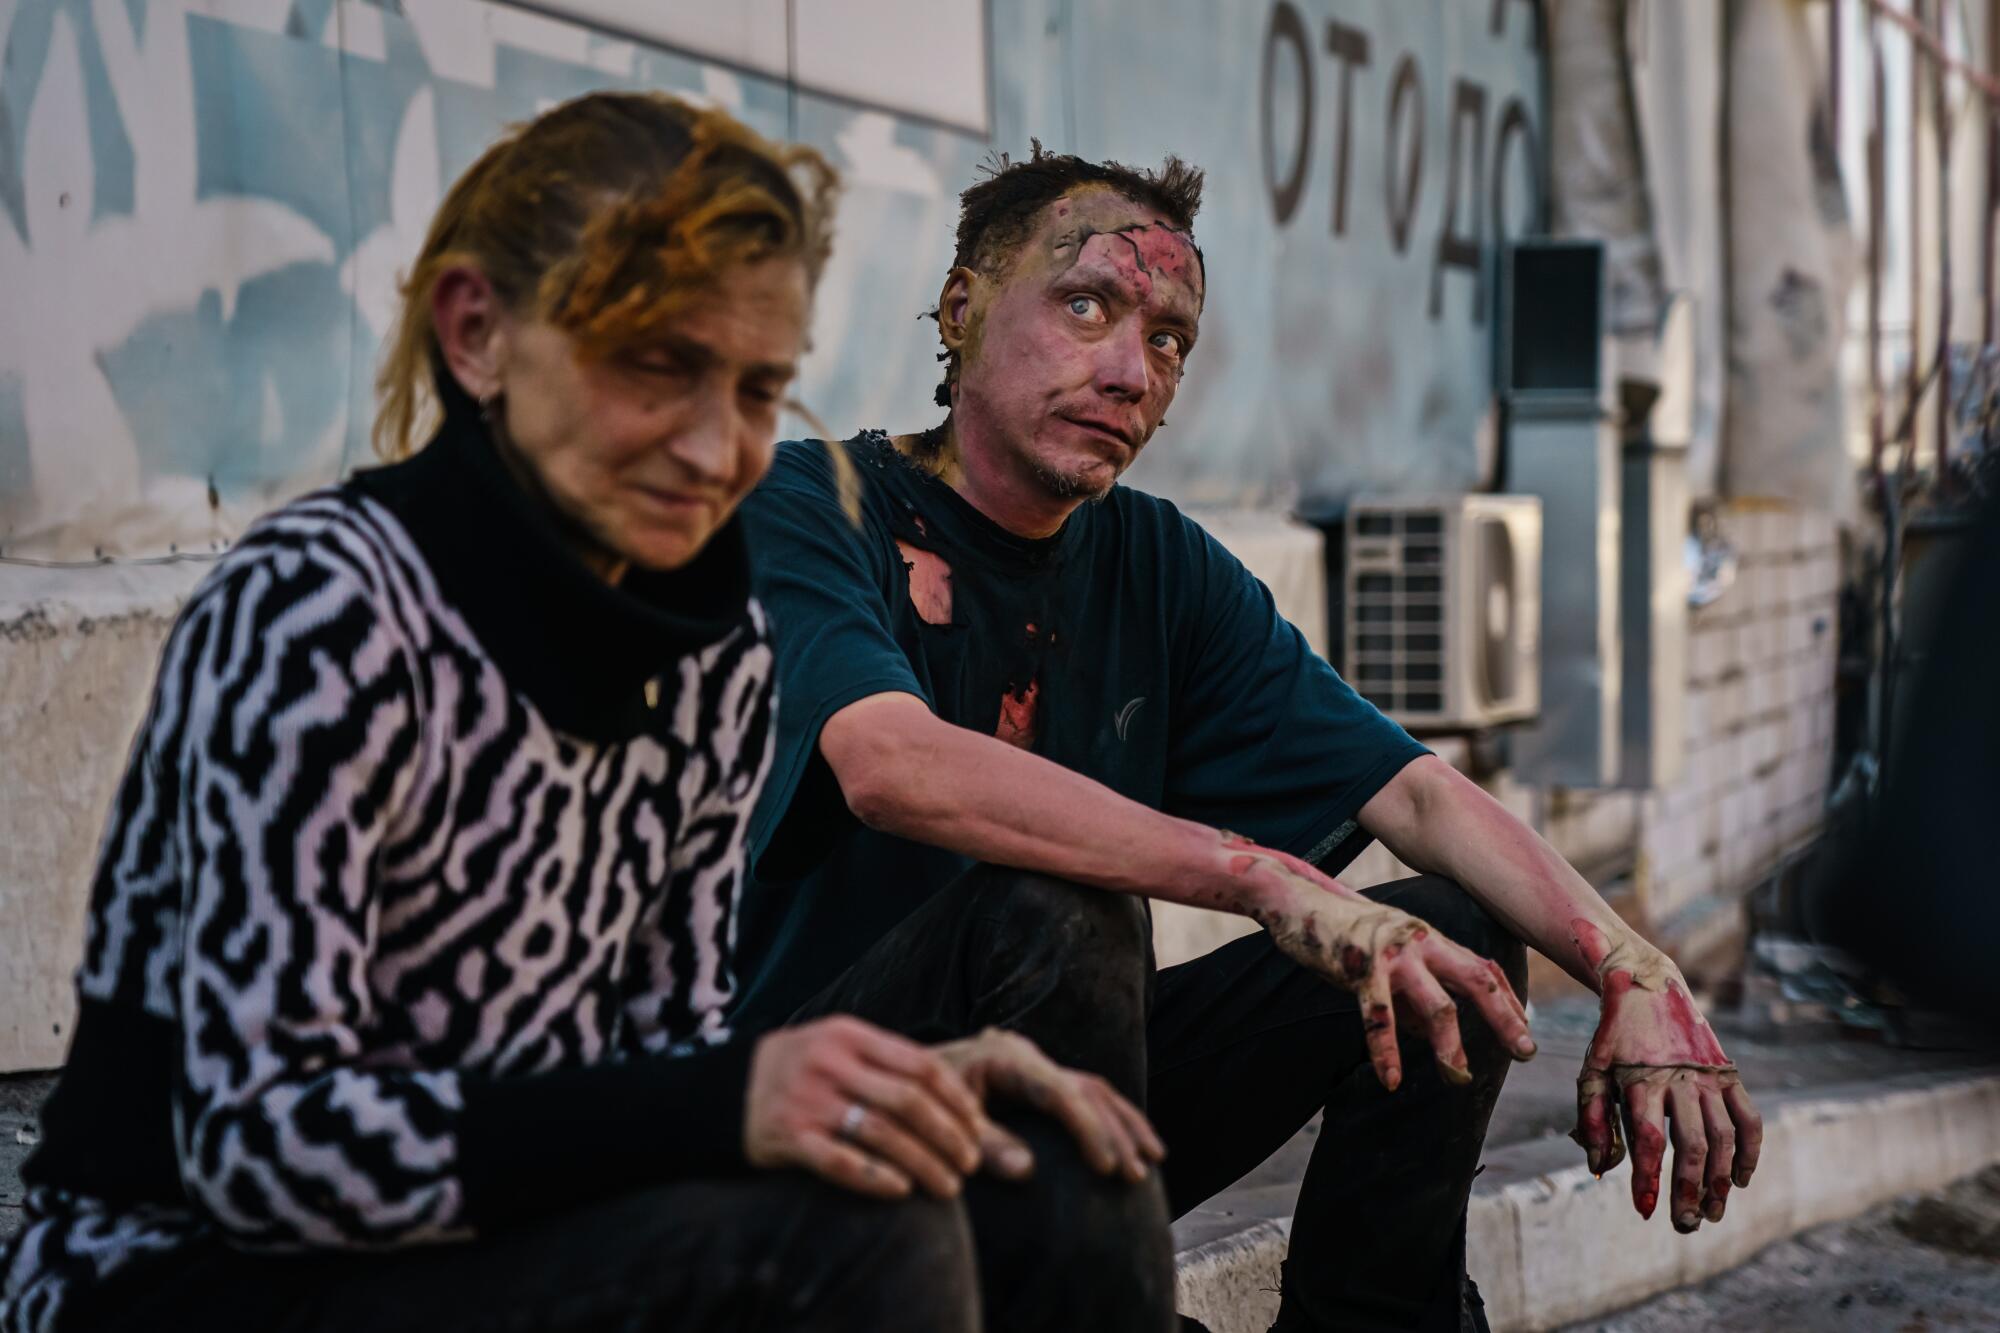 A woman on left and a man sit on a sidewalk curb. The man has burn injuries on his face, body and hands.